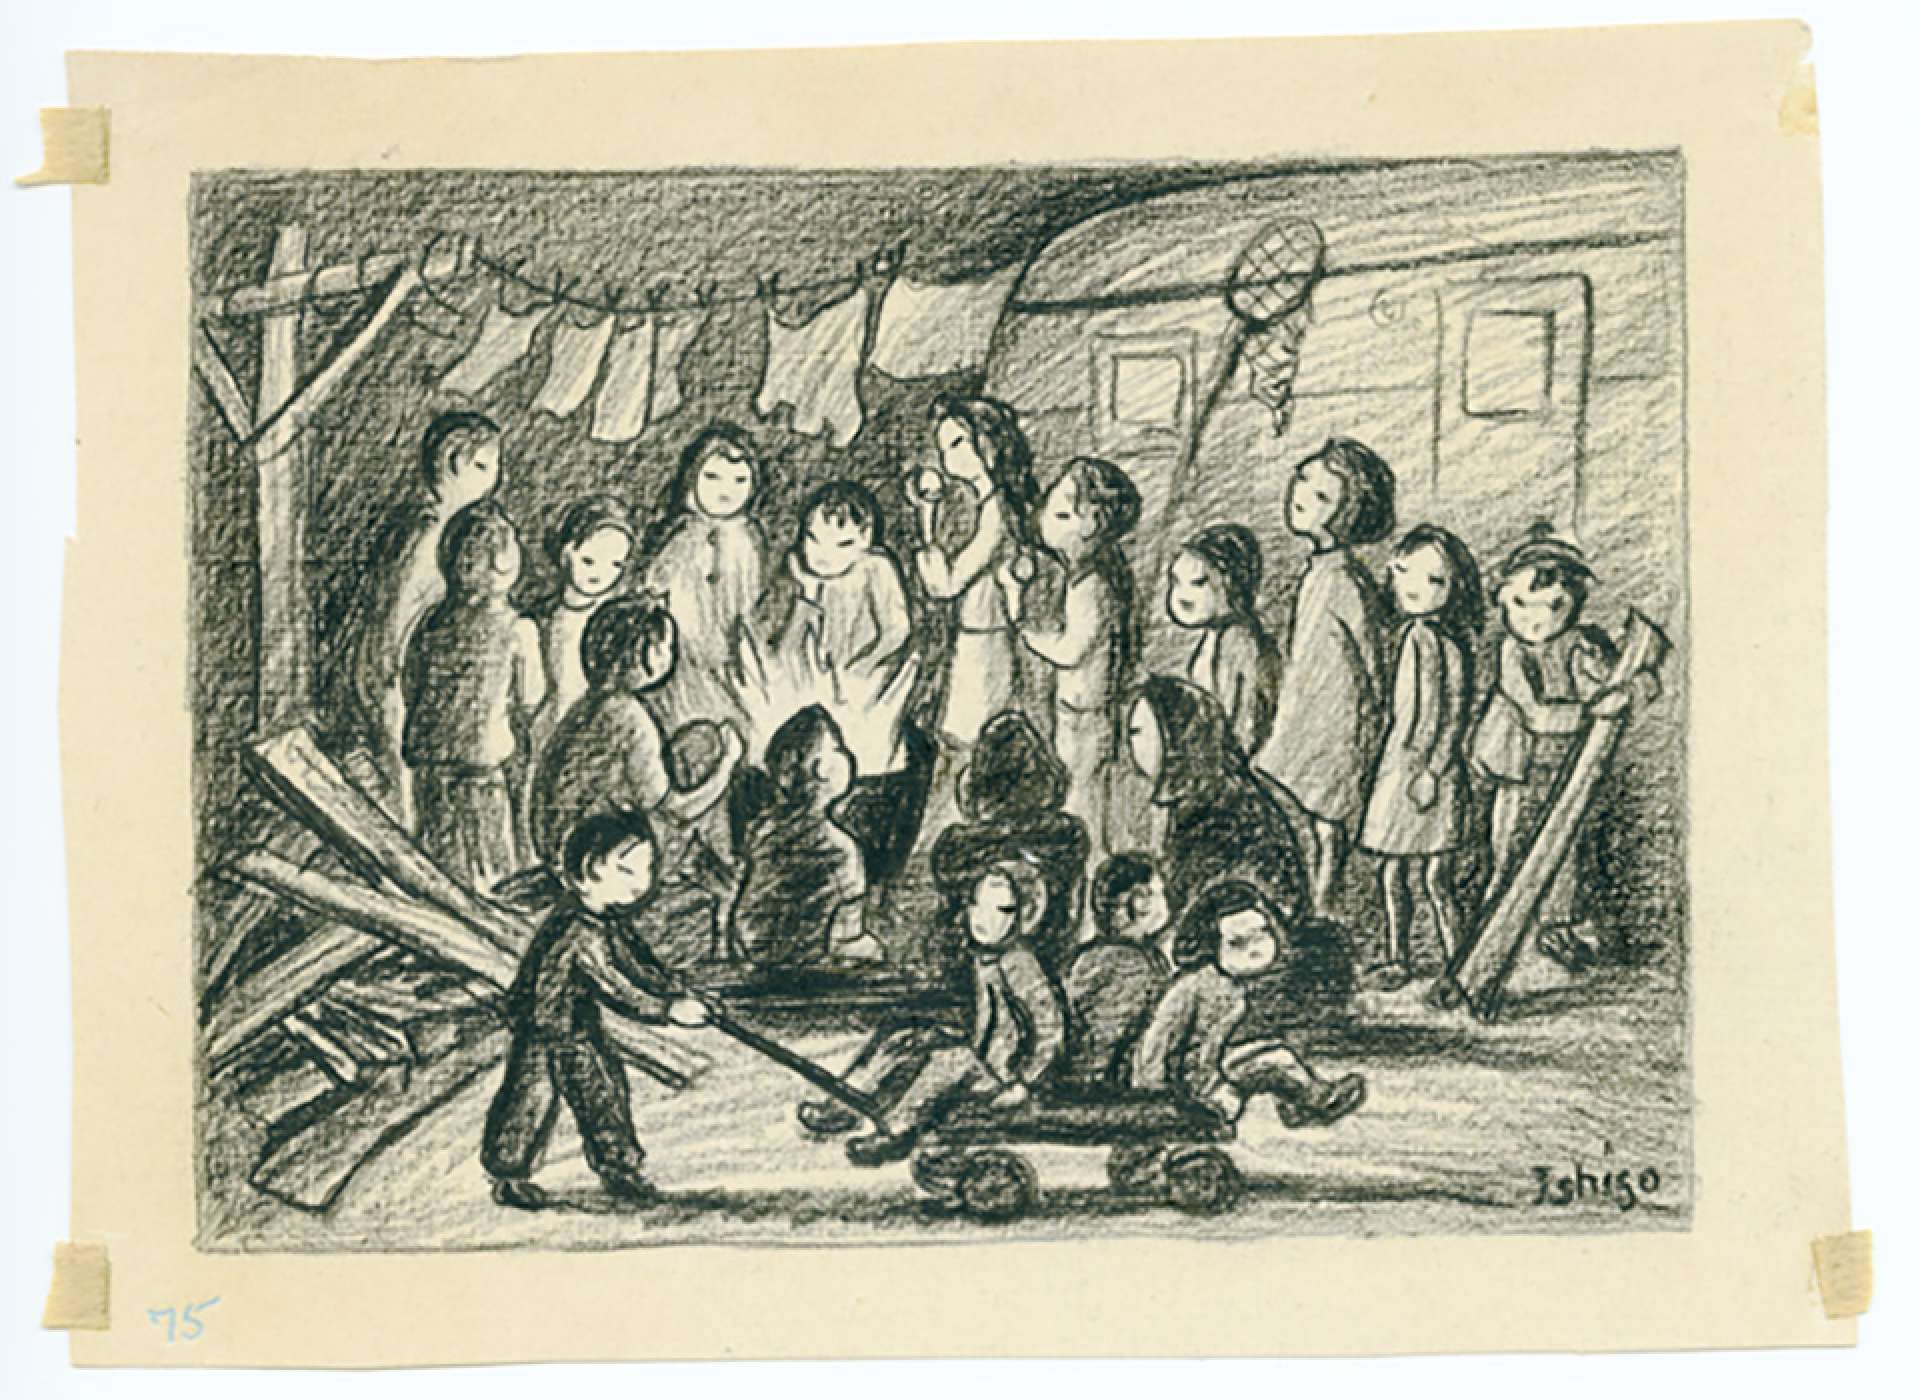 Children Drawing from a Japanese American Incarceration Camp